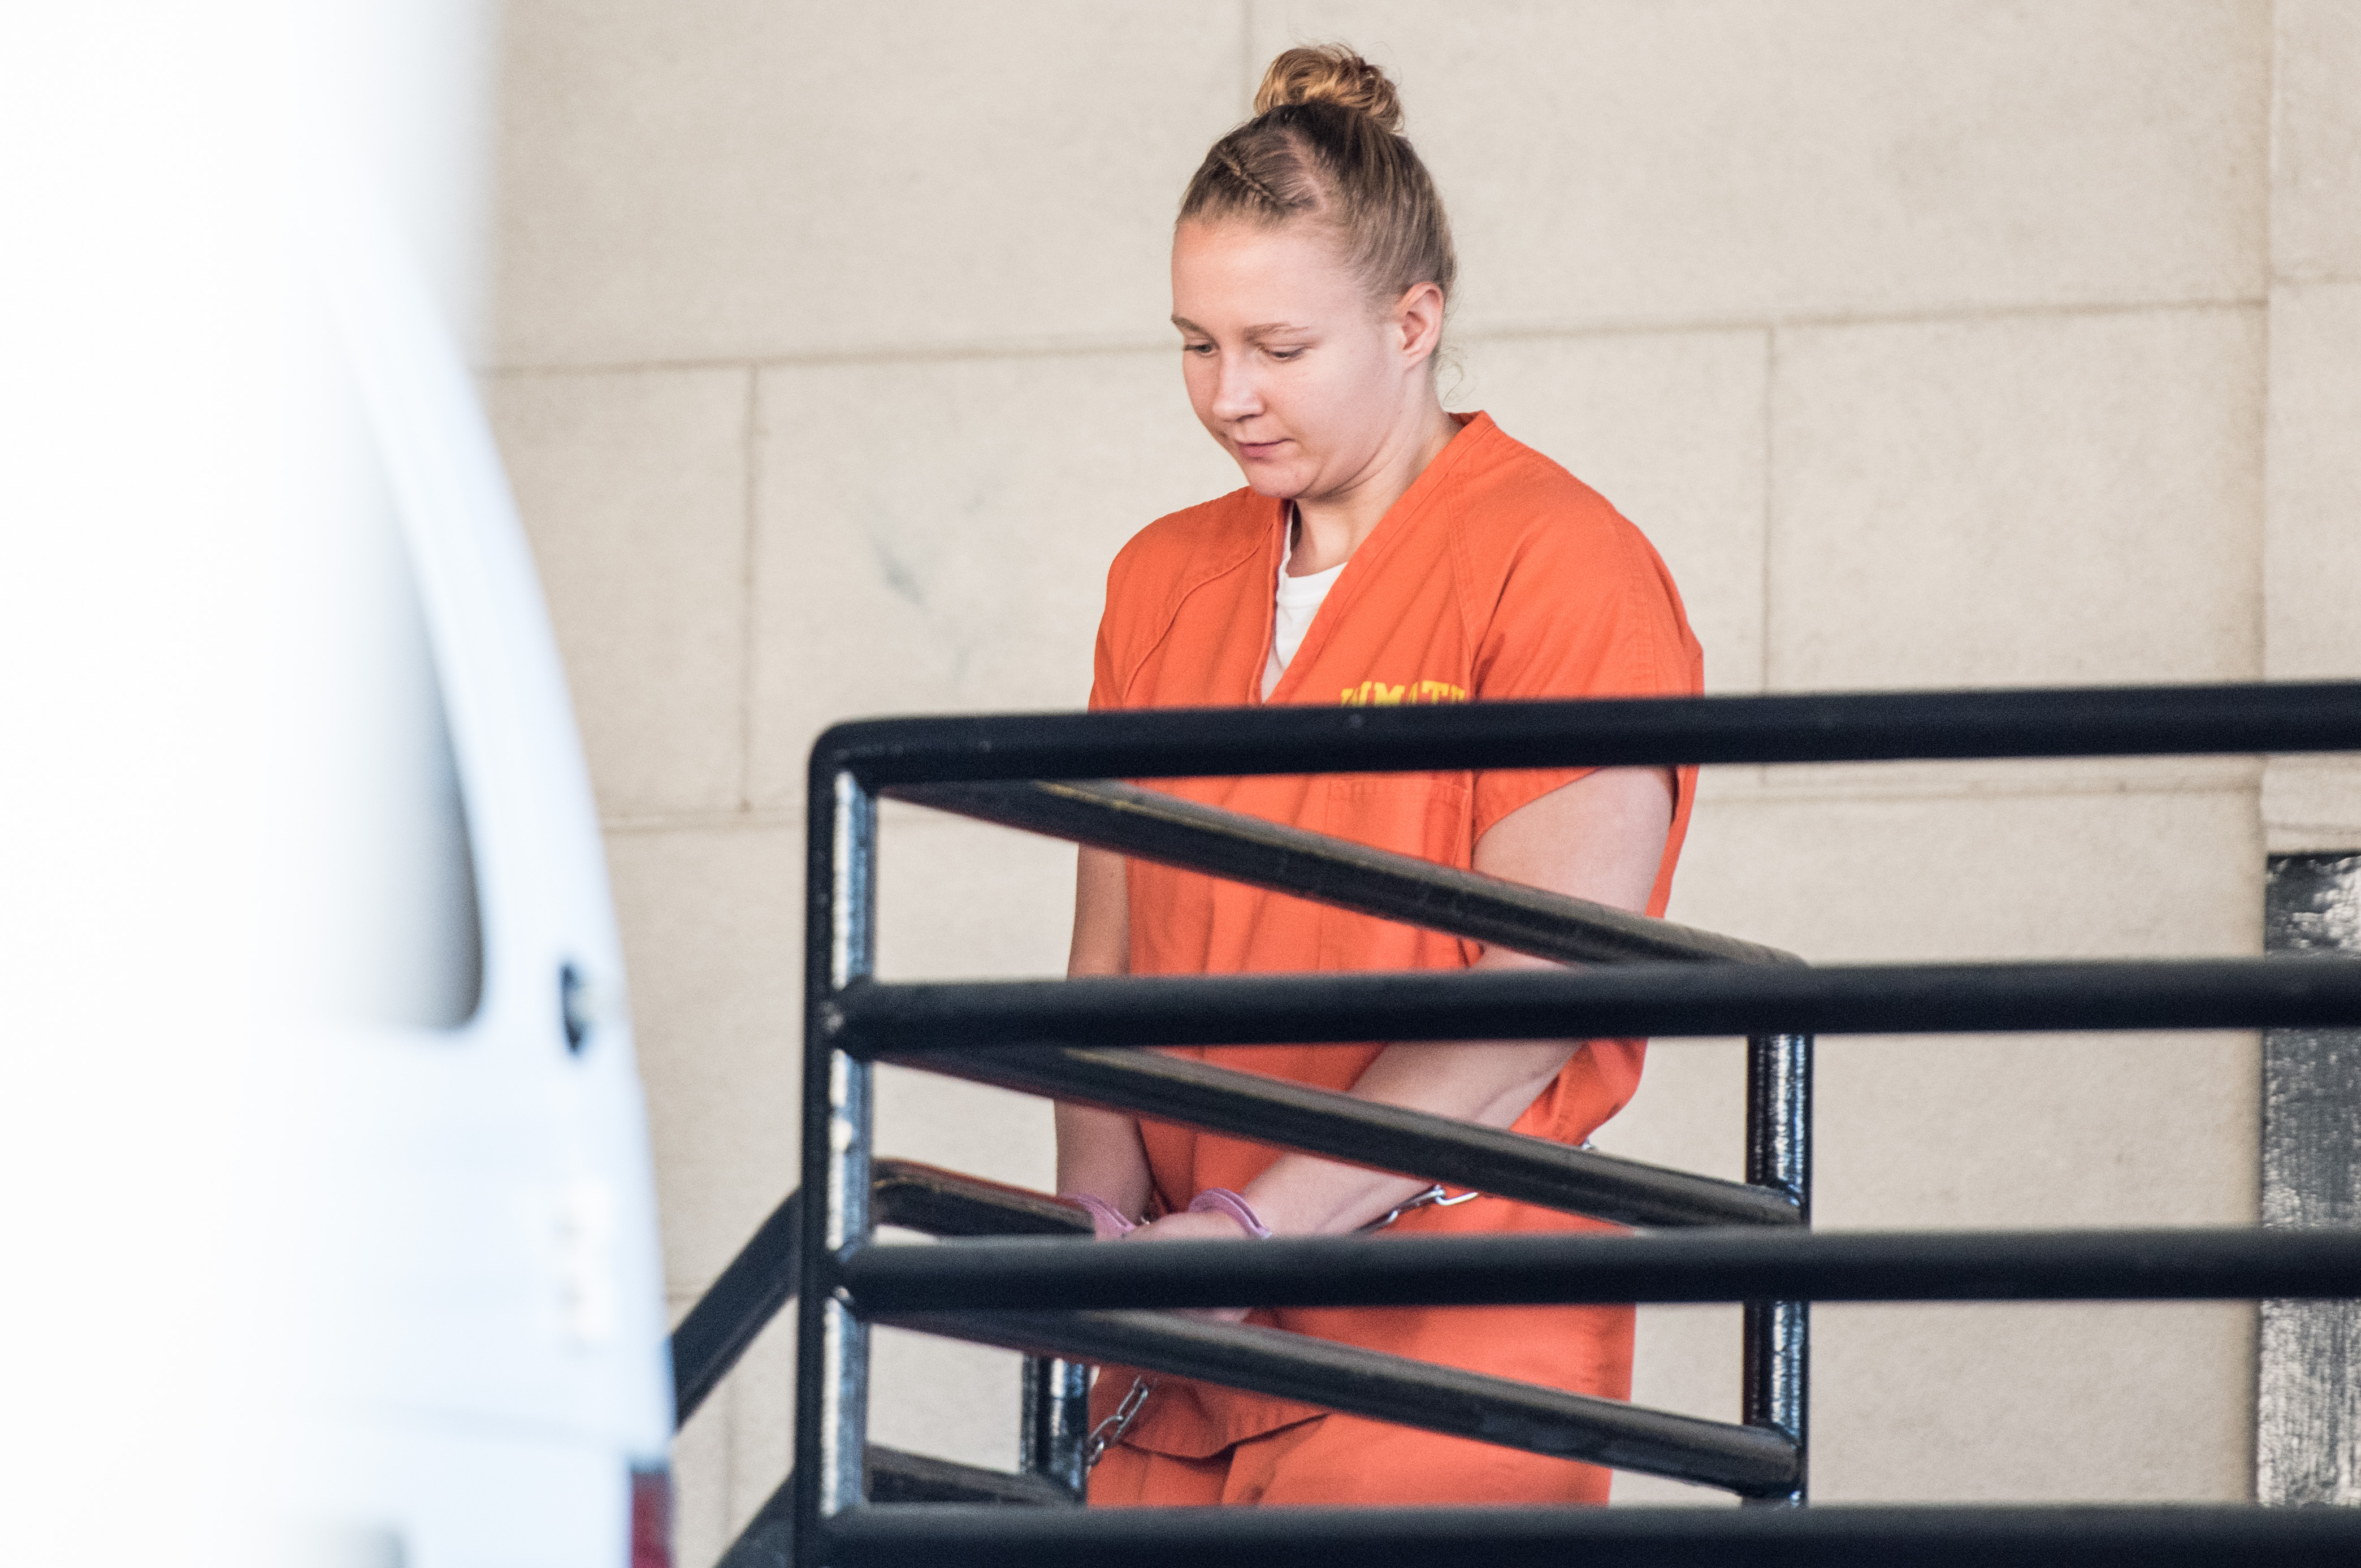 Reality Winner exits the Augusta Courthouse June 8, 2017 in Augusta, Georgia. (Sean Rayford—Getty Images)